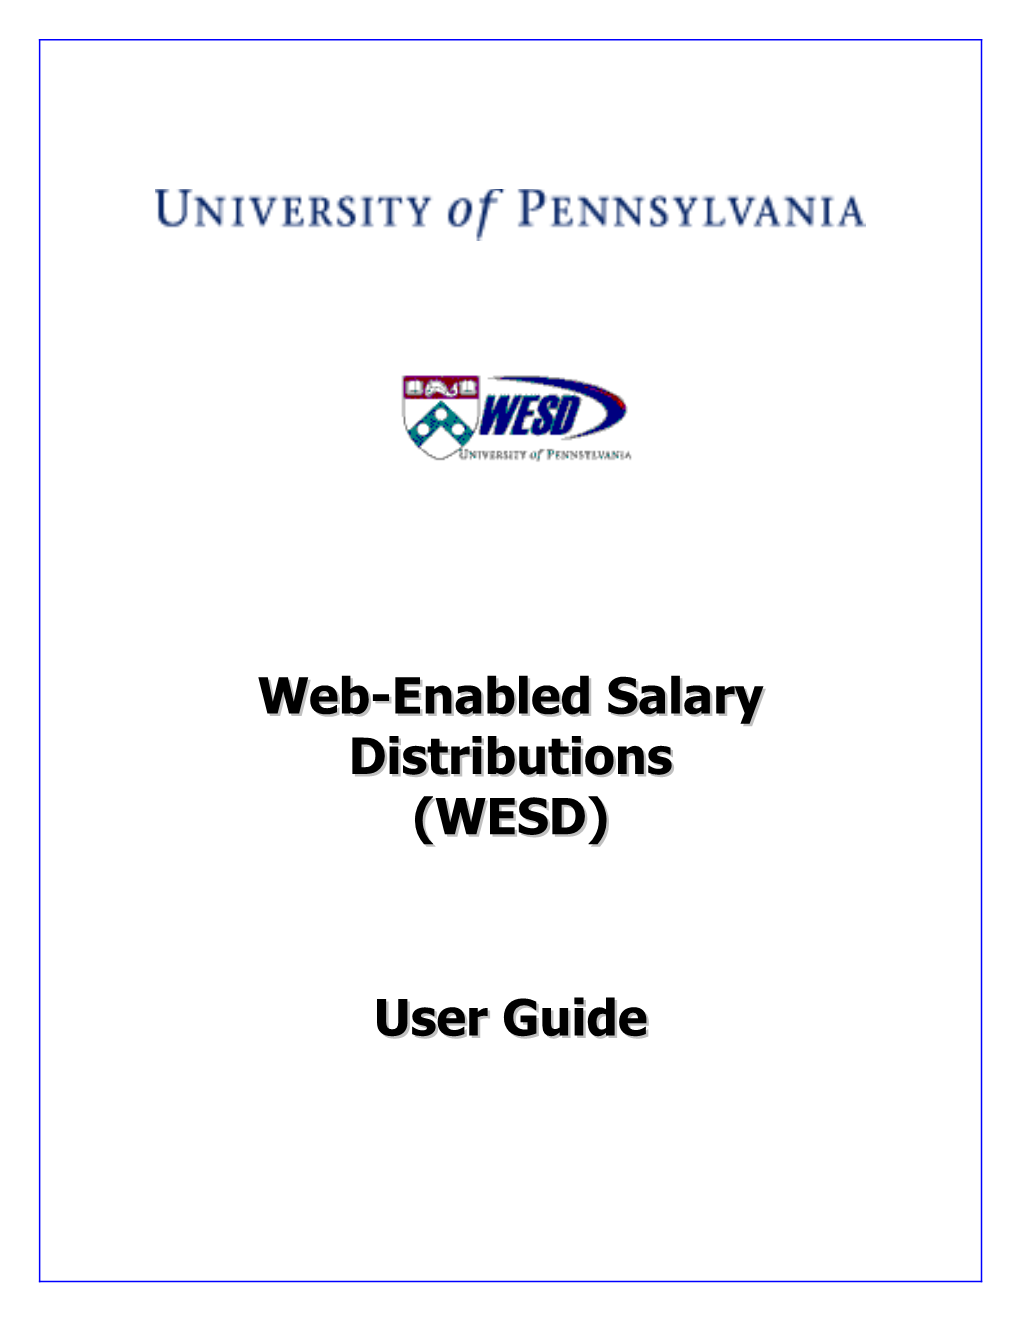 Web-Enabled Salary Distributions